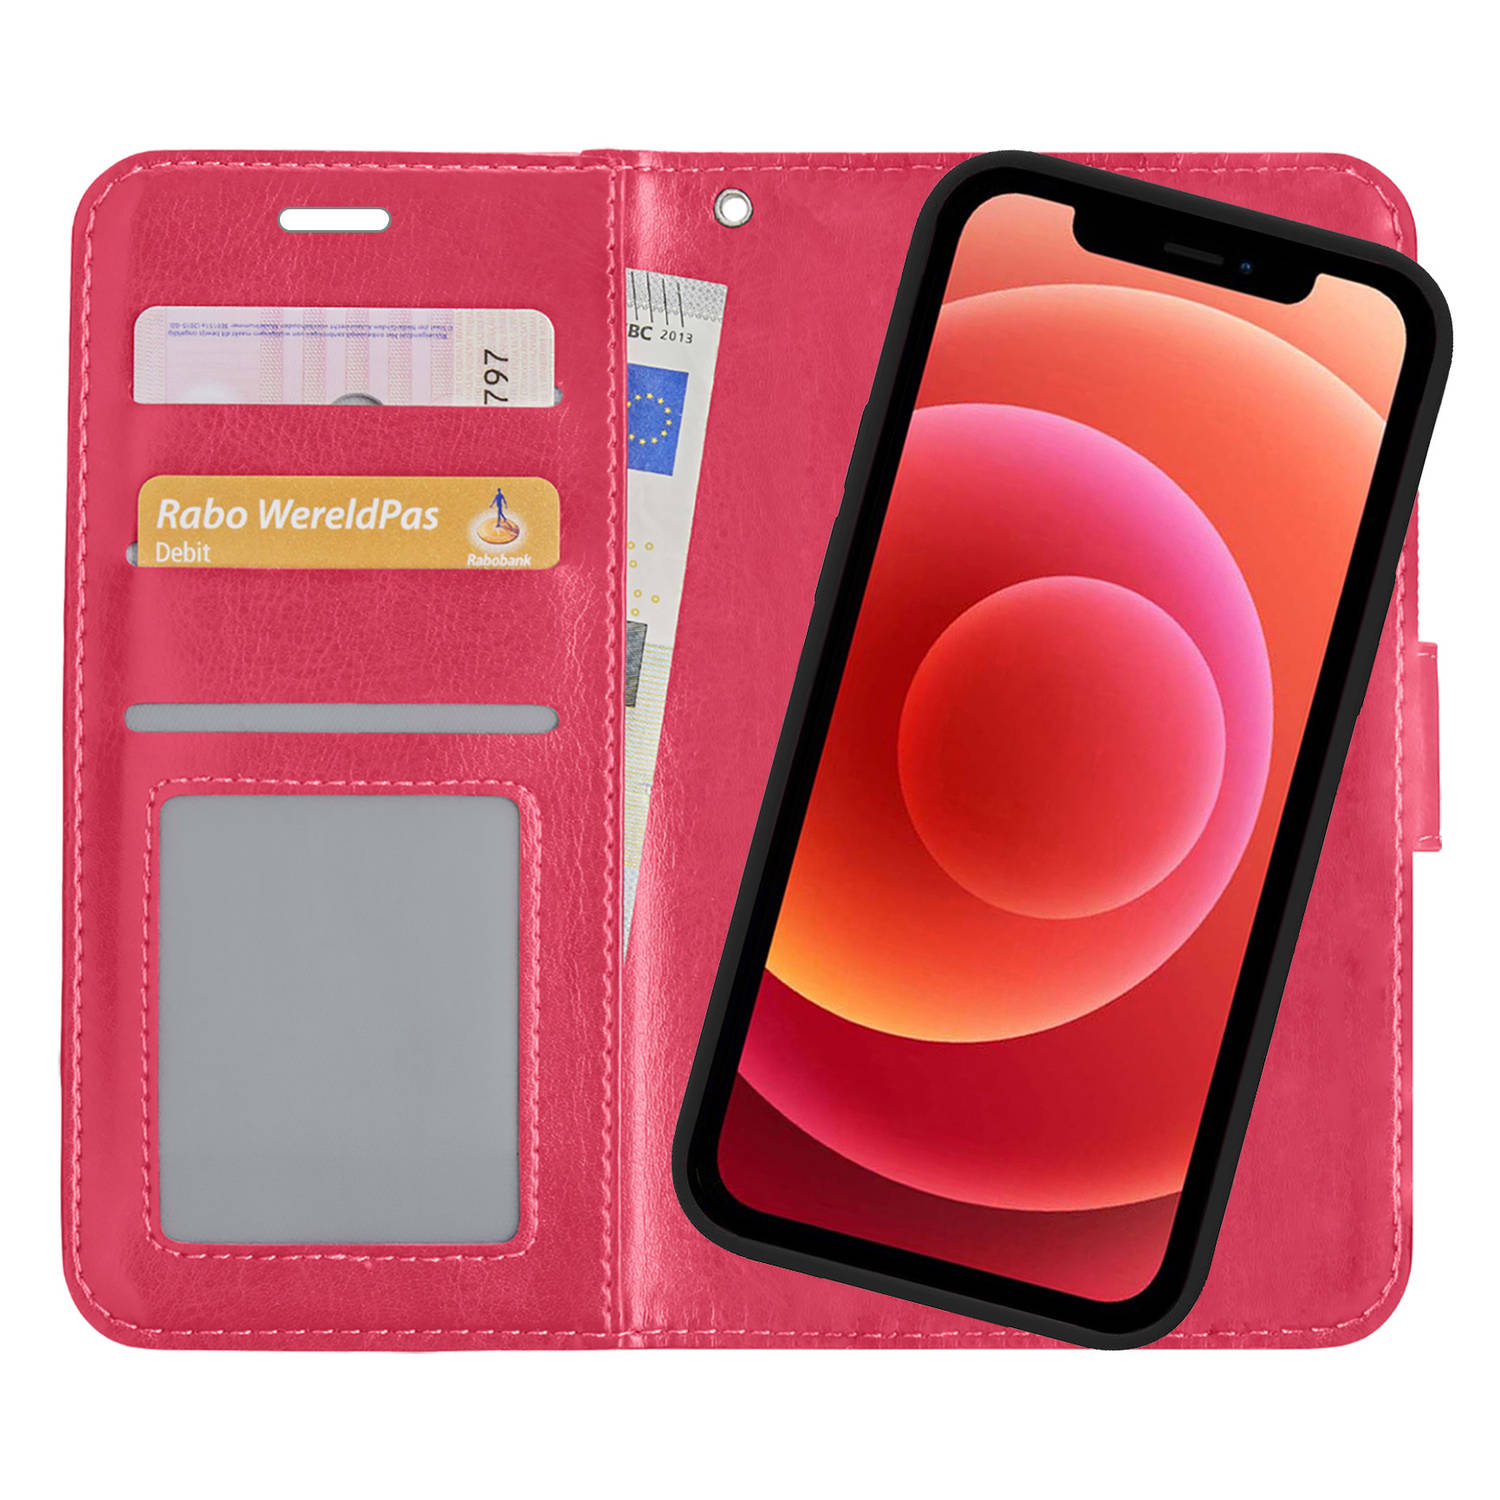 iPhone X Hoesje Bookcase Hoes 2-in-1 Cover - iPhone X Hoes 2-in-1 Hoesje Case - Donker Roze